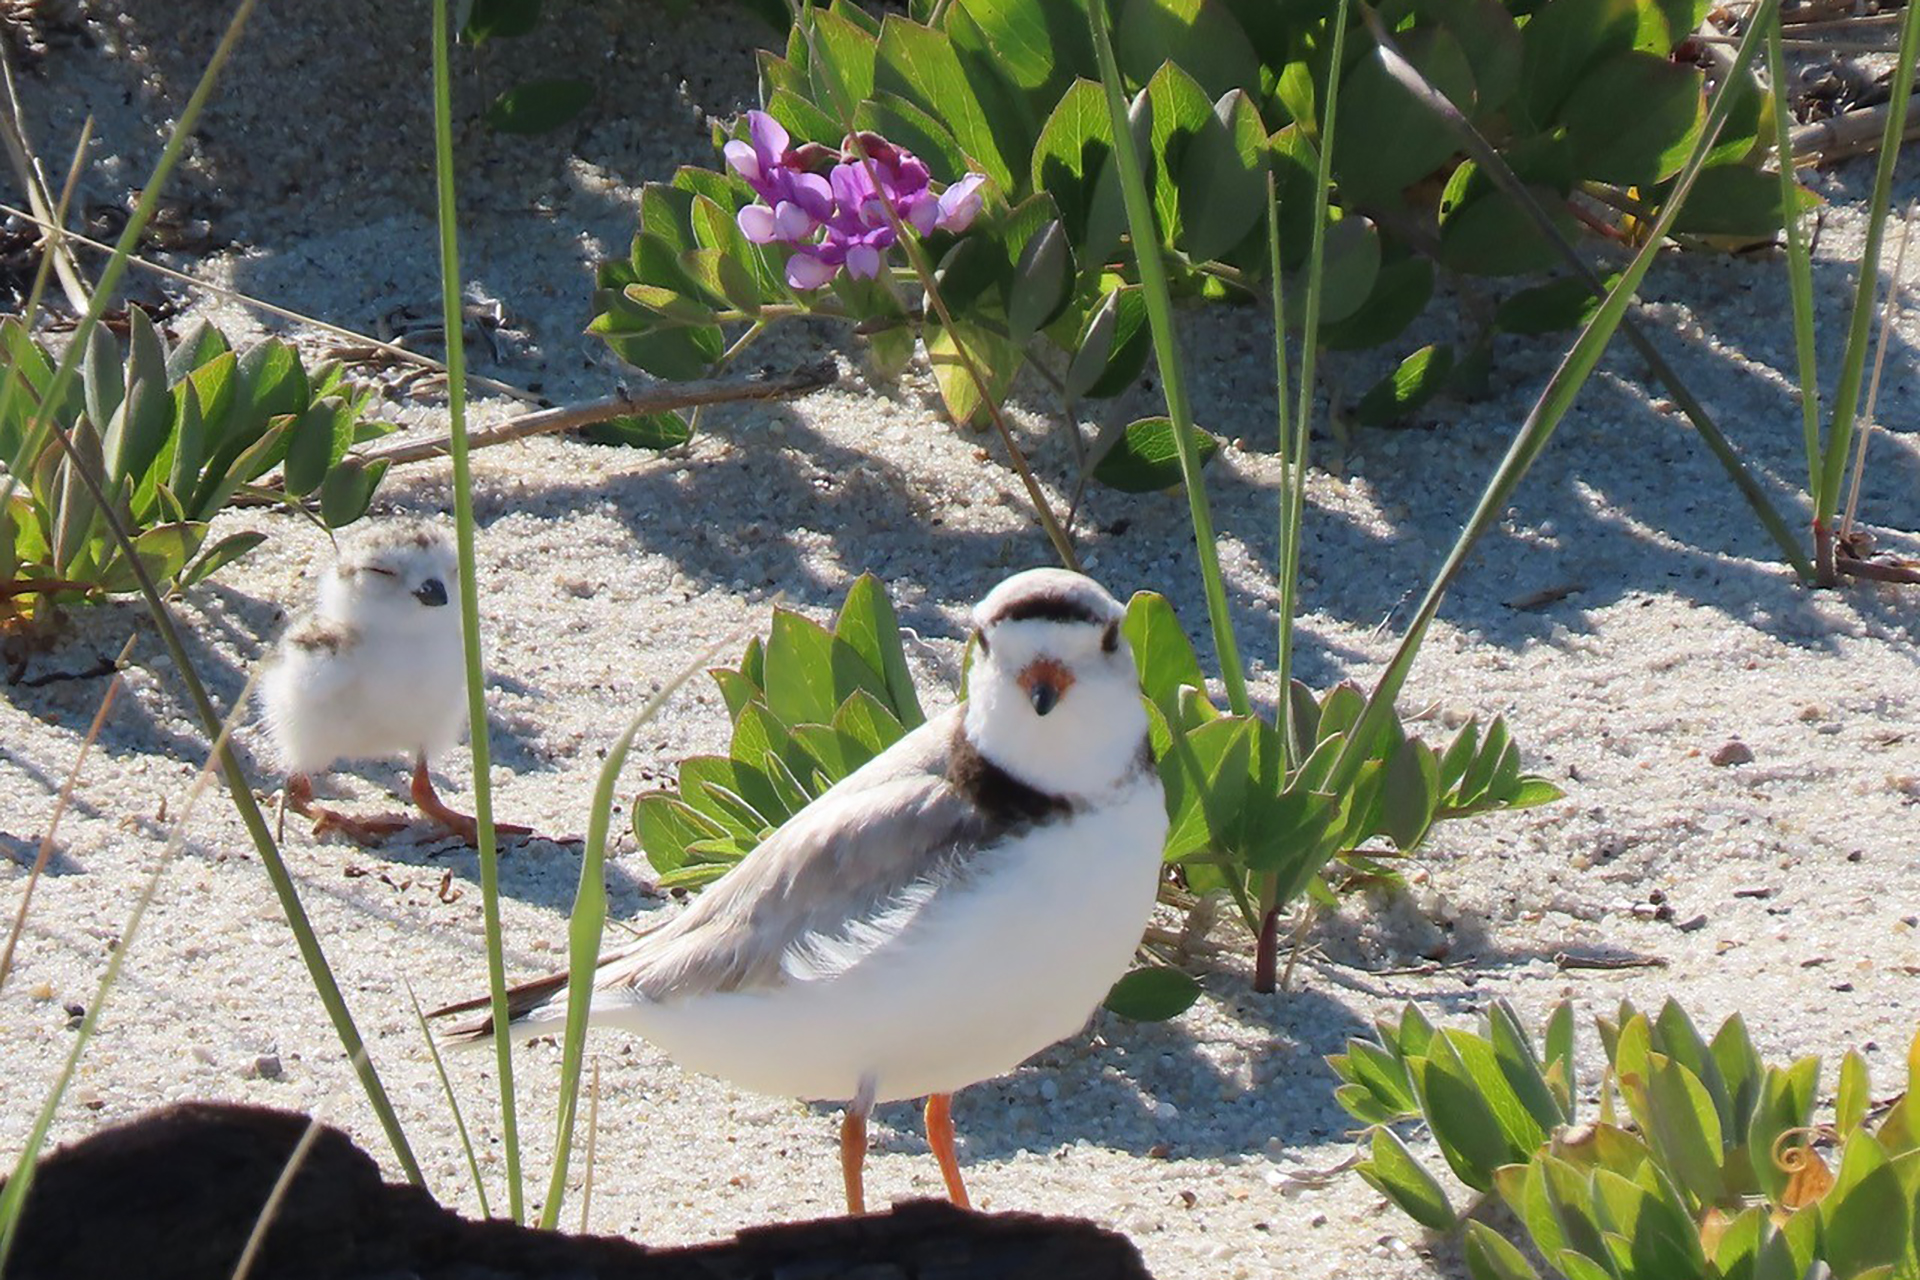 White and gray bird standing on sand and grass with a fluffy chick standing behind it